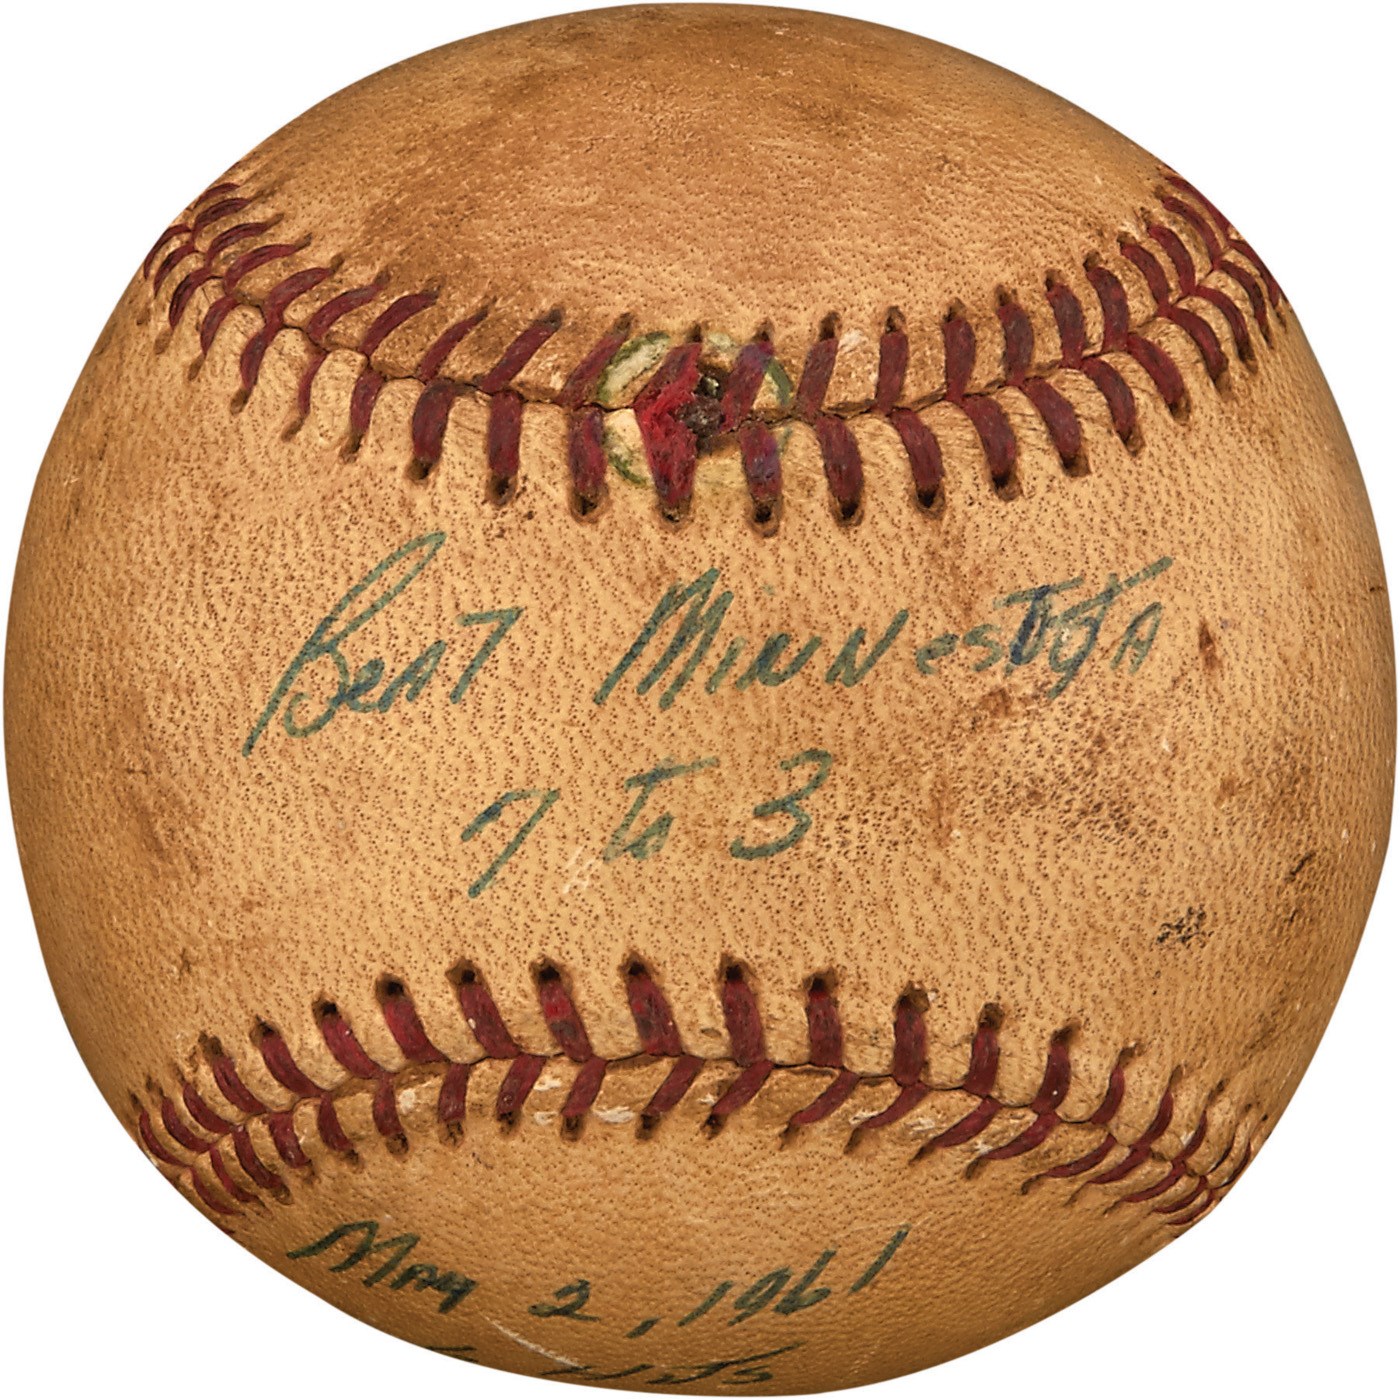 - 1961 Roger Maris Game Ball from Home Run #2 (ex-Bob Turley Collection)